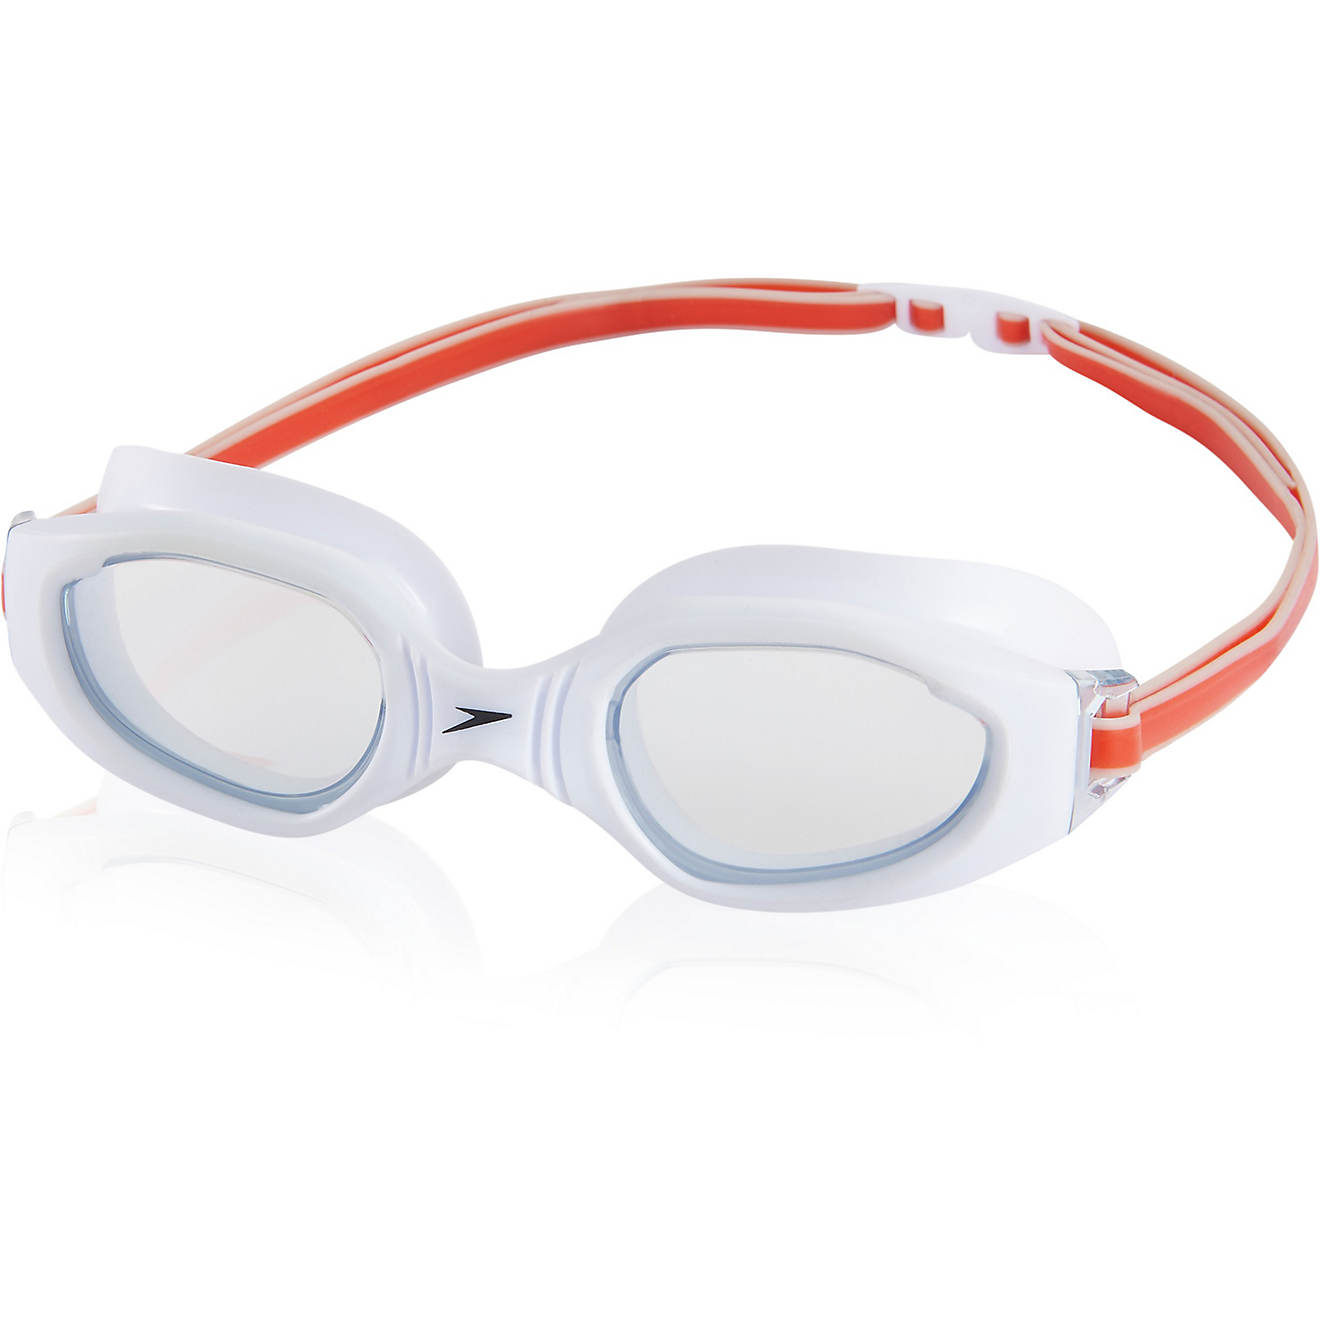 Speedo Adults' Hydro Comfort Racing and Training Swim Goggles                                                                    - view number 1